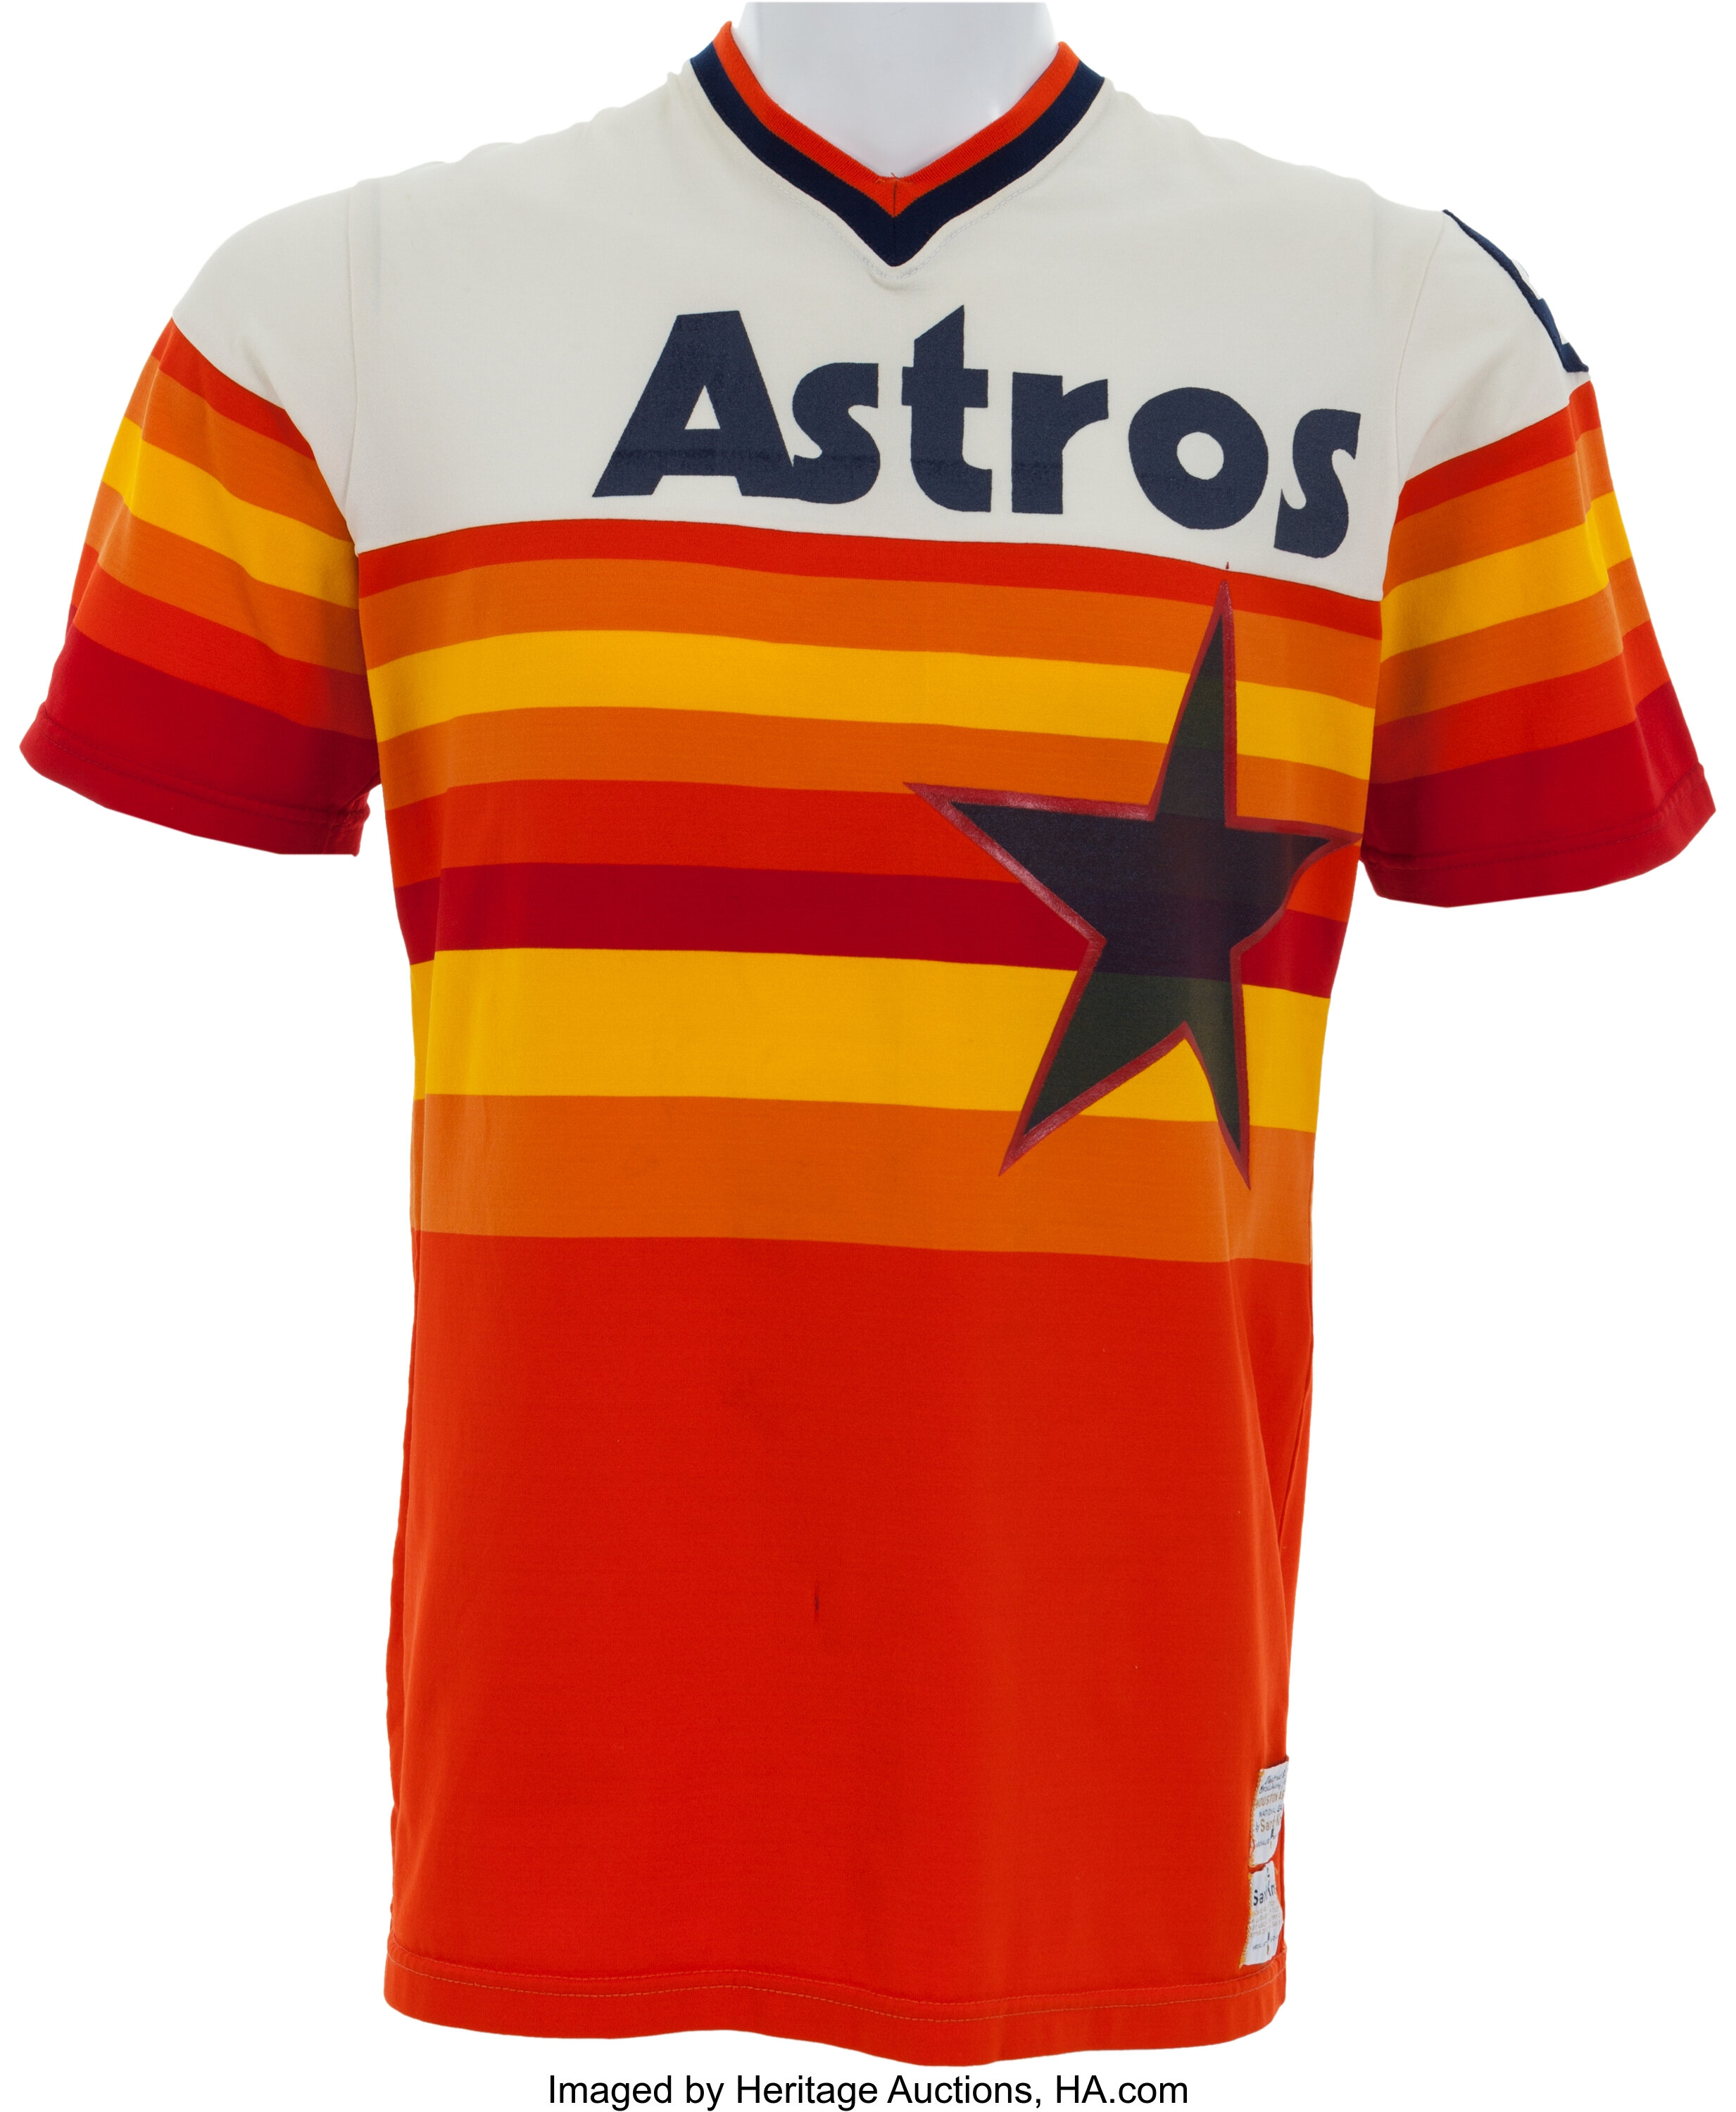 1975 Houston Astros and the 1976 Chicago White Sox: A uniform